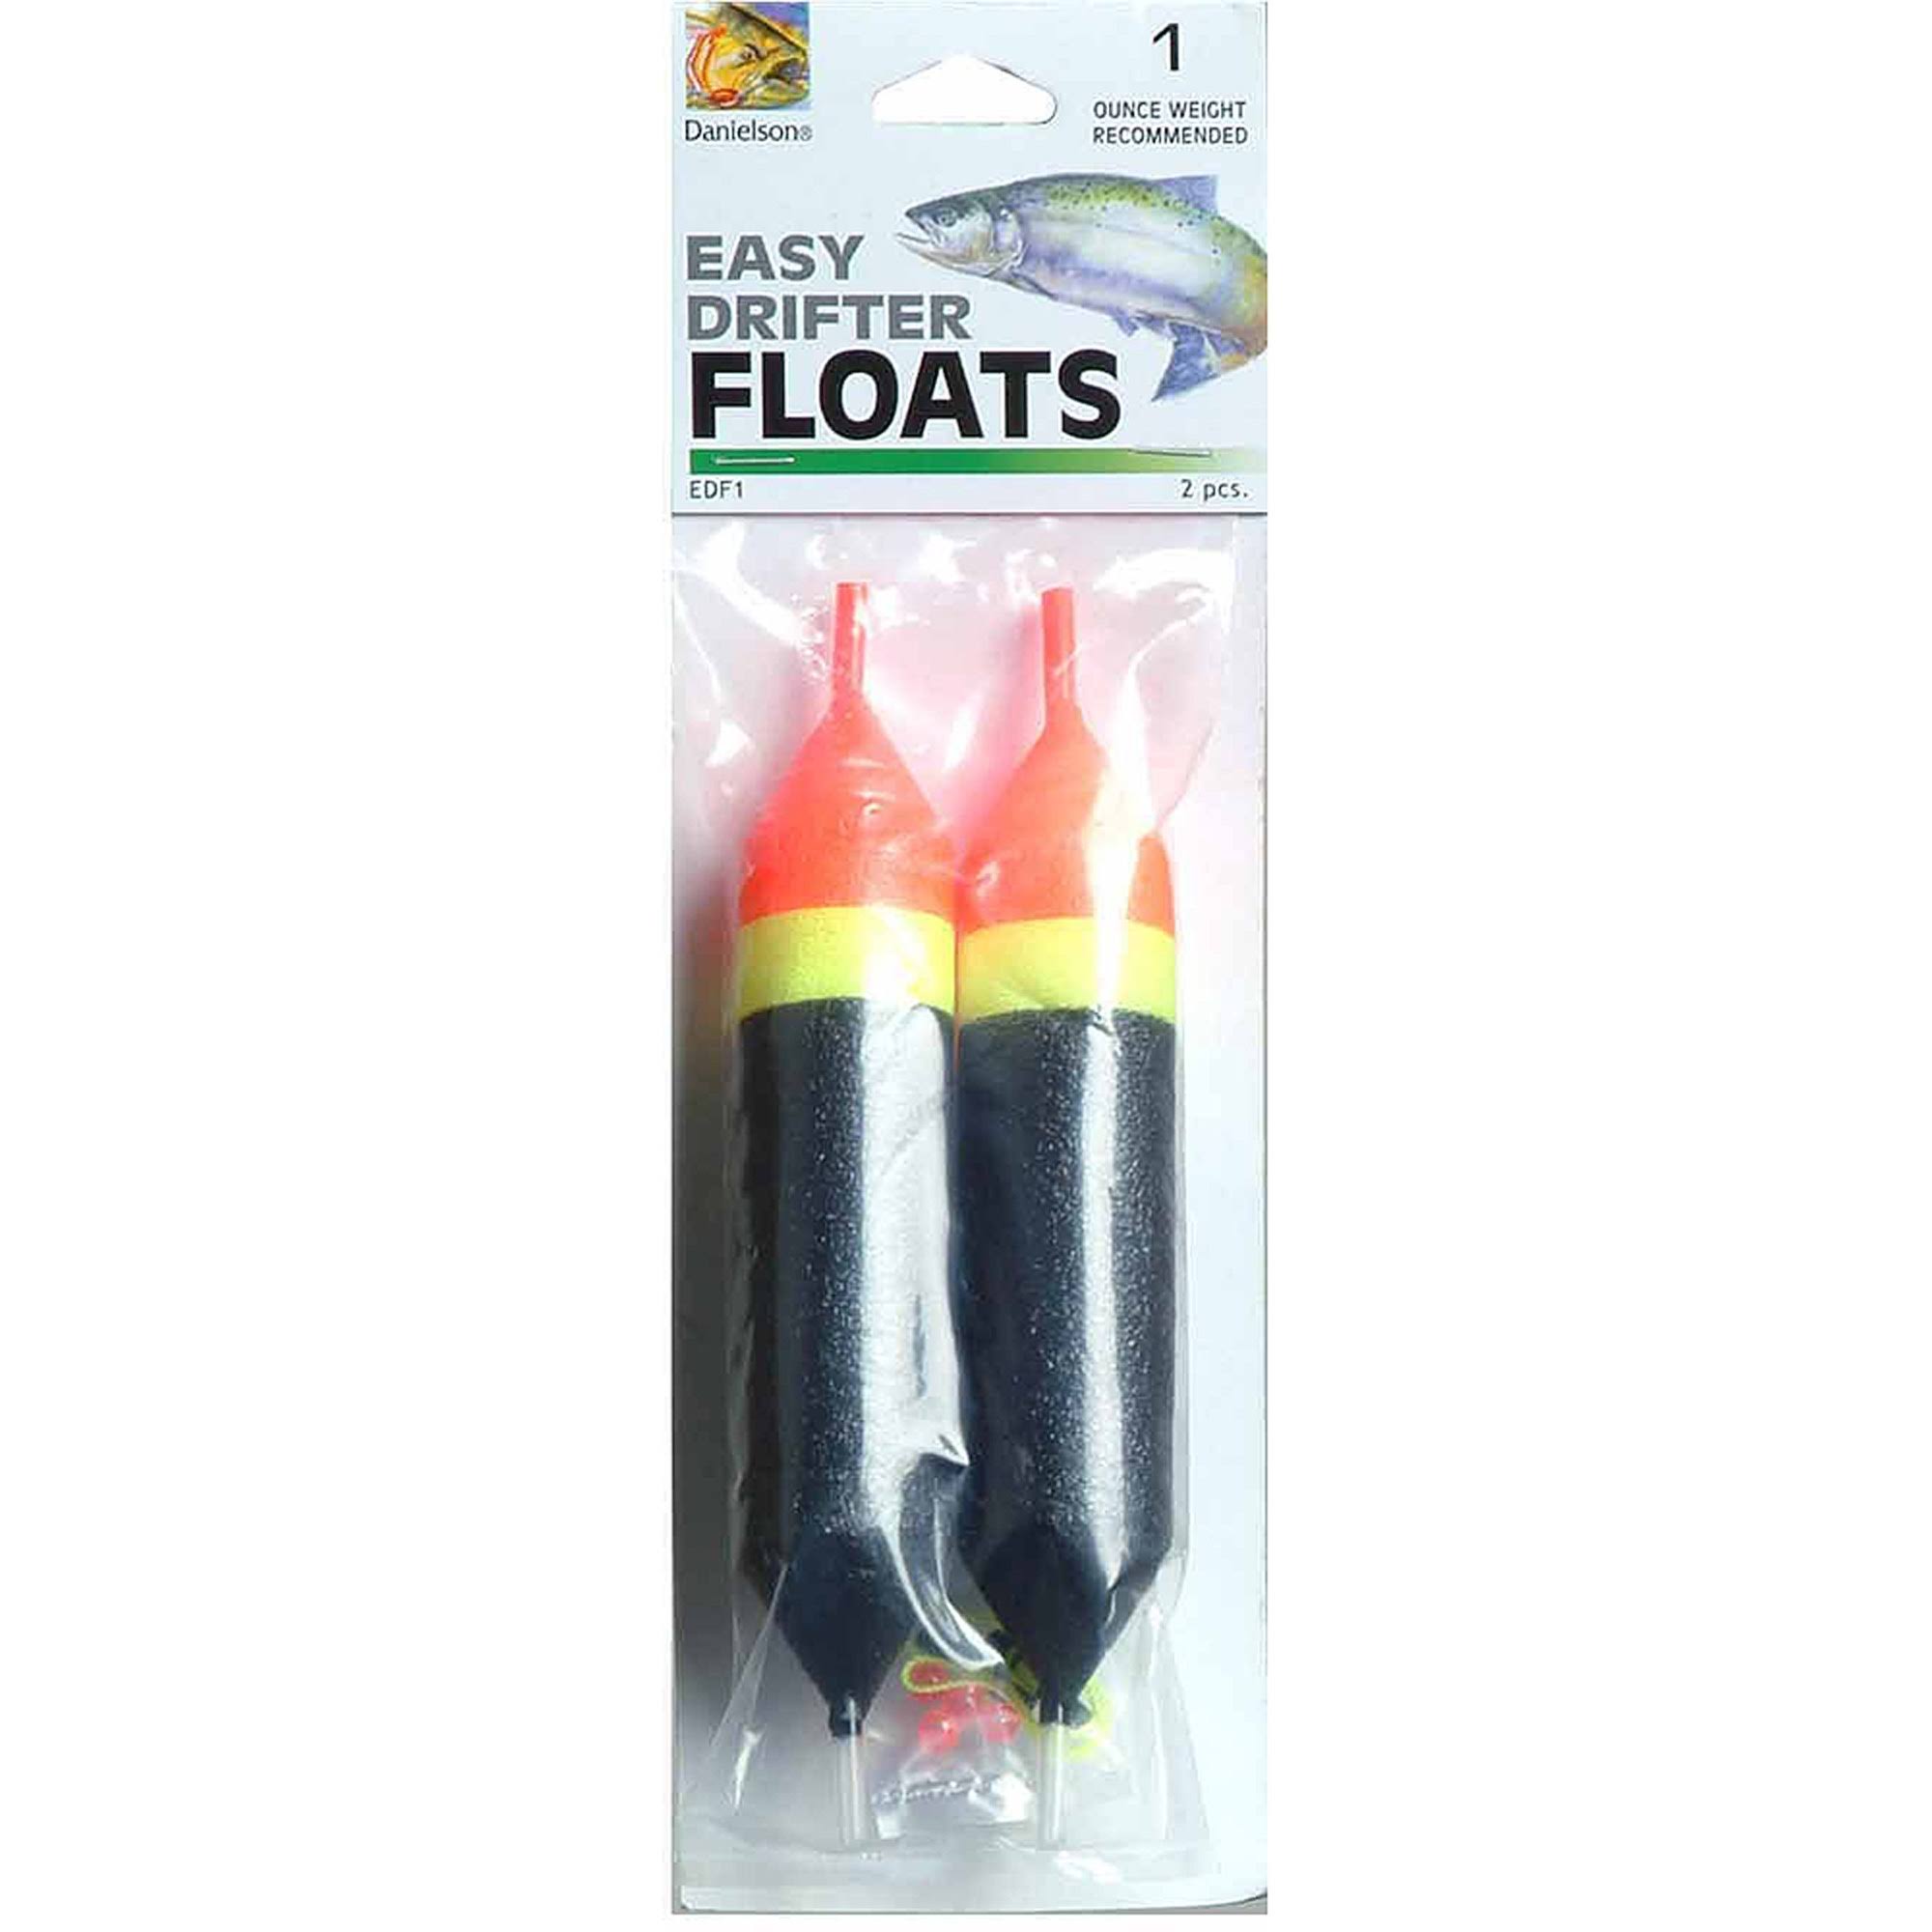 Danielson Easy Drifter Floats | Boating & Fishing | Best Price Guarantee | 30 Day Money Back Guarantee | Delivery Guaranteed